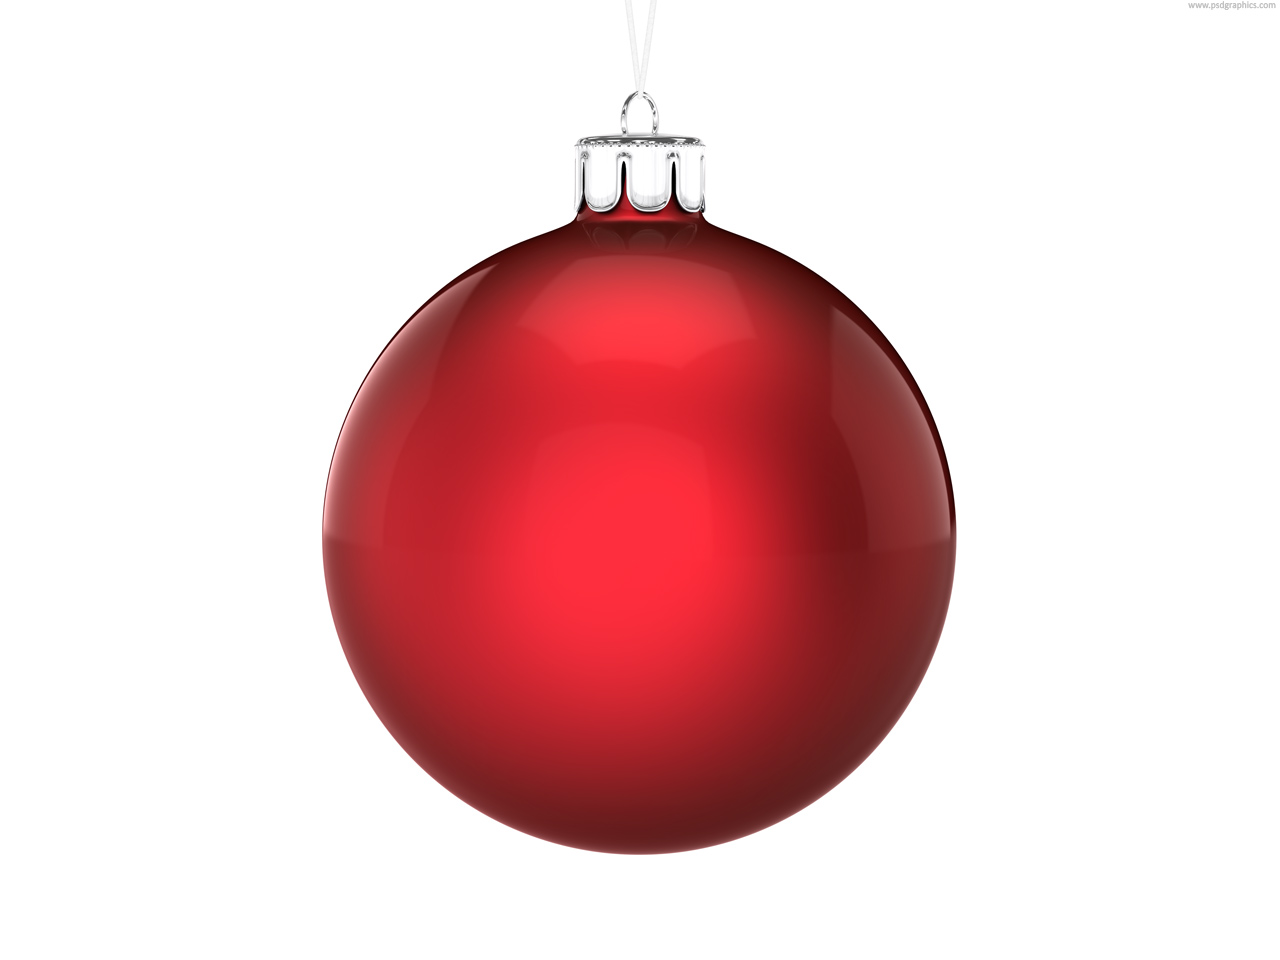 Christmas Ball Ornament – Free PSD Download | YourSourceIsOpen.